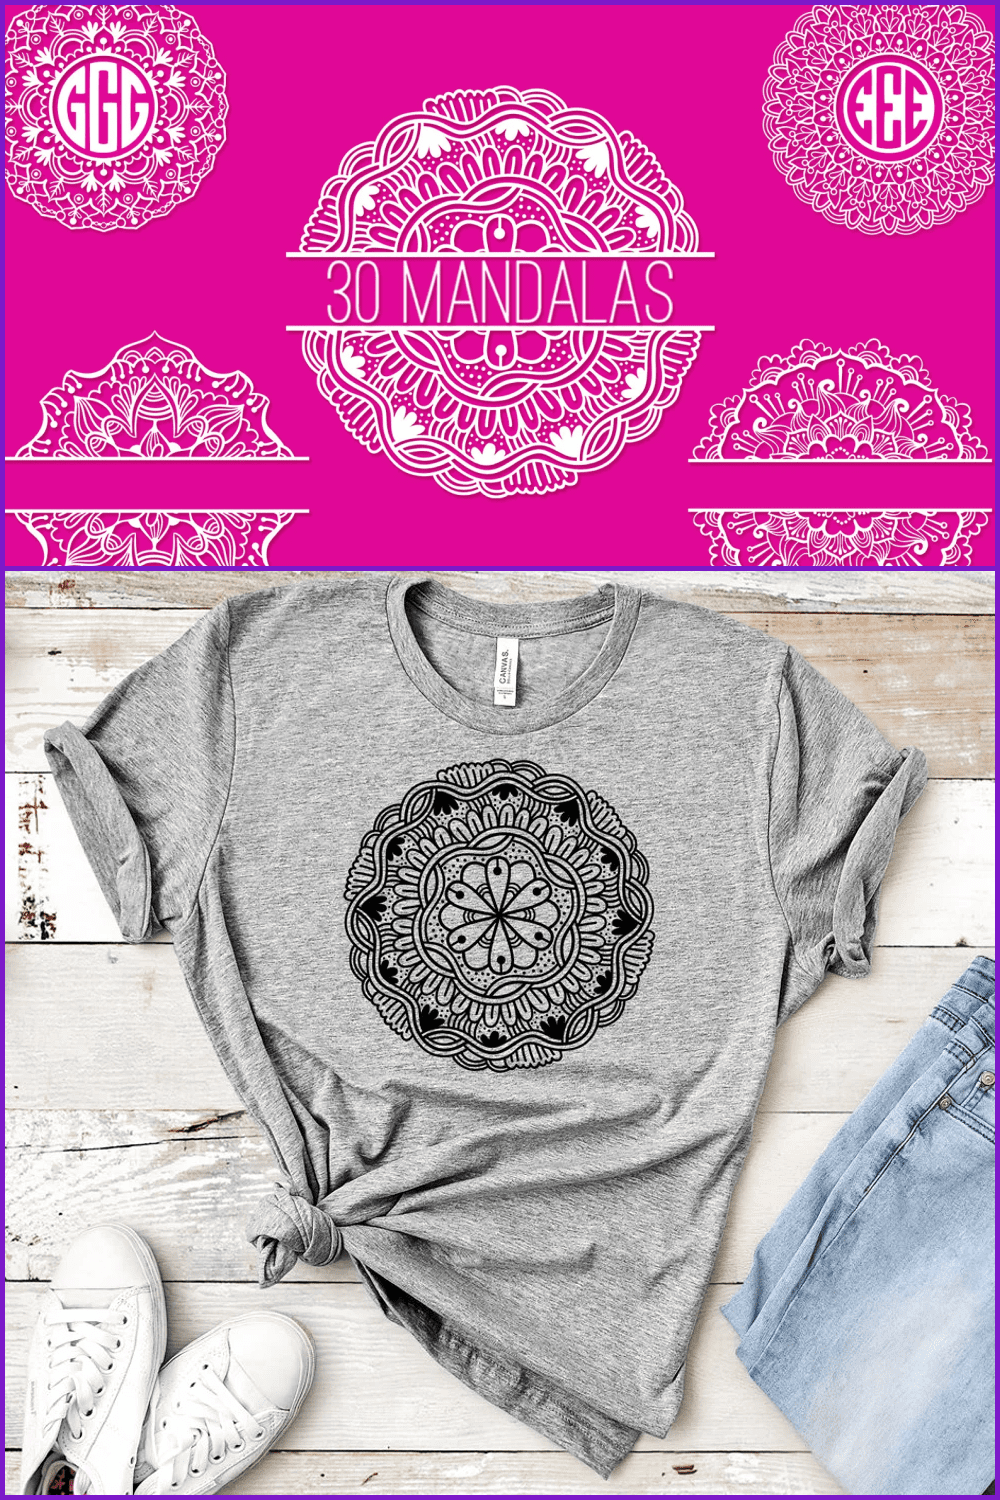 This vibrant mandala will perfectly decorate the products of your project - be it an eco-bag or a T-shirt.